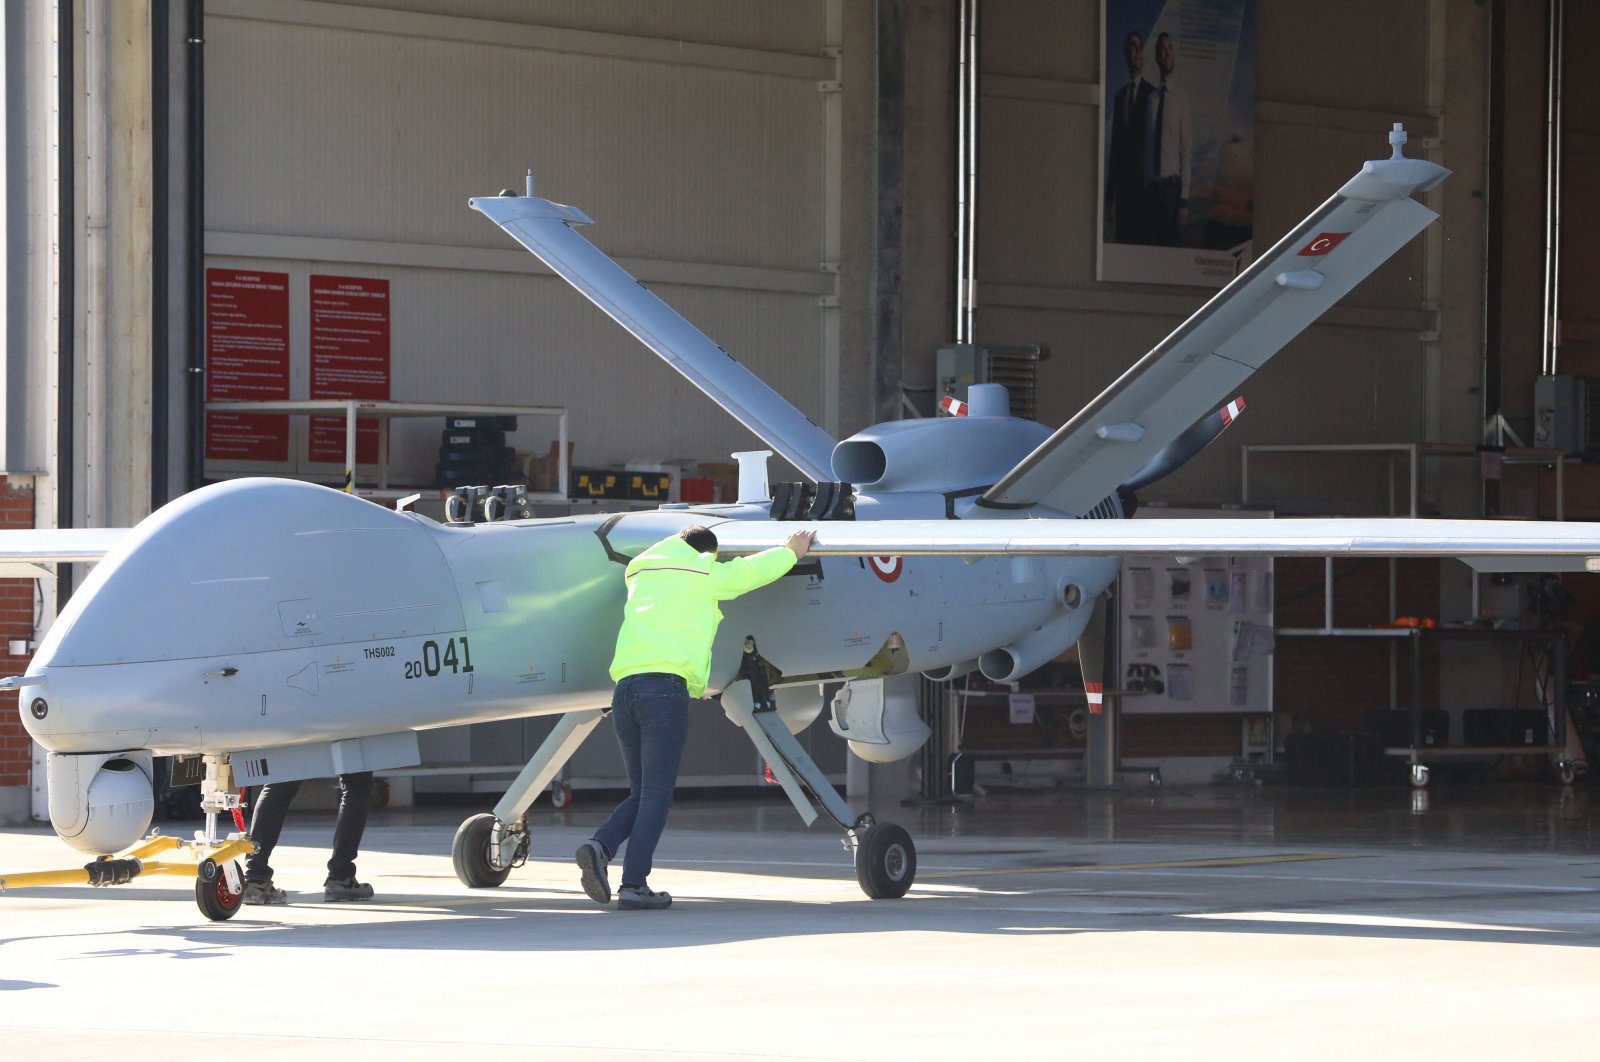 The Anka drone, an unmanned aerial military vehicle developed by Turkish Aerospace Industries (TAI), is seen in Ankara, Turkey, March 5, 2021. (AFP Photo)